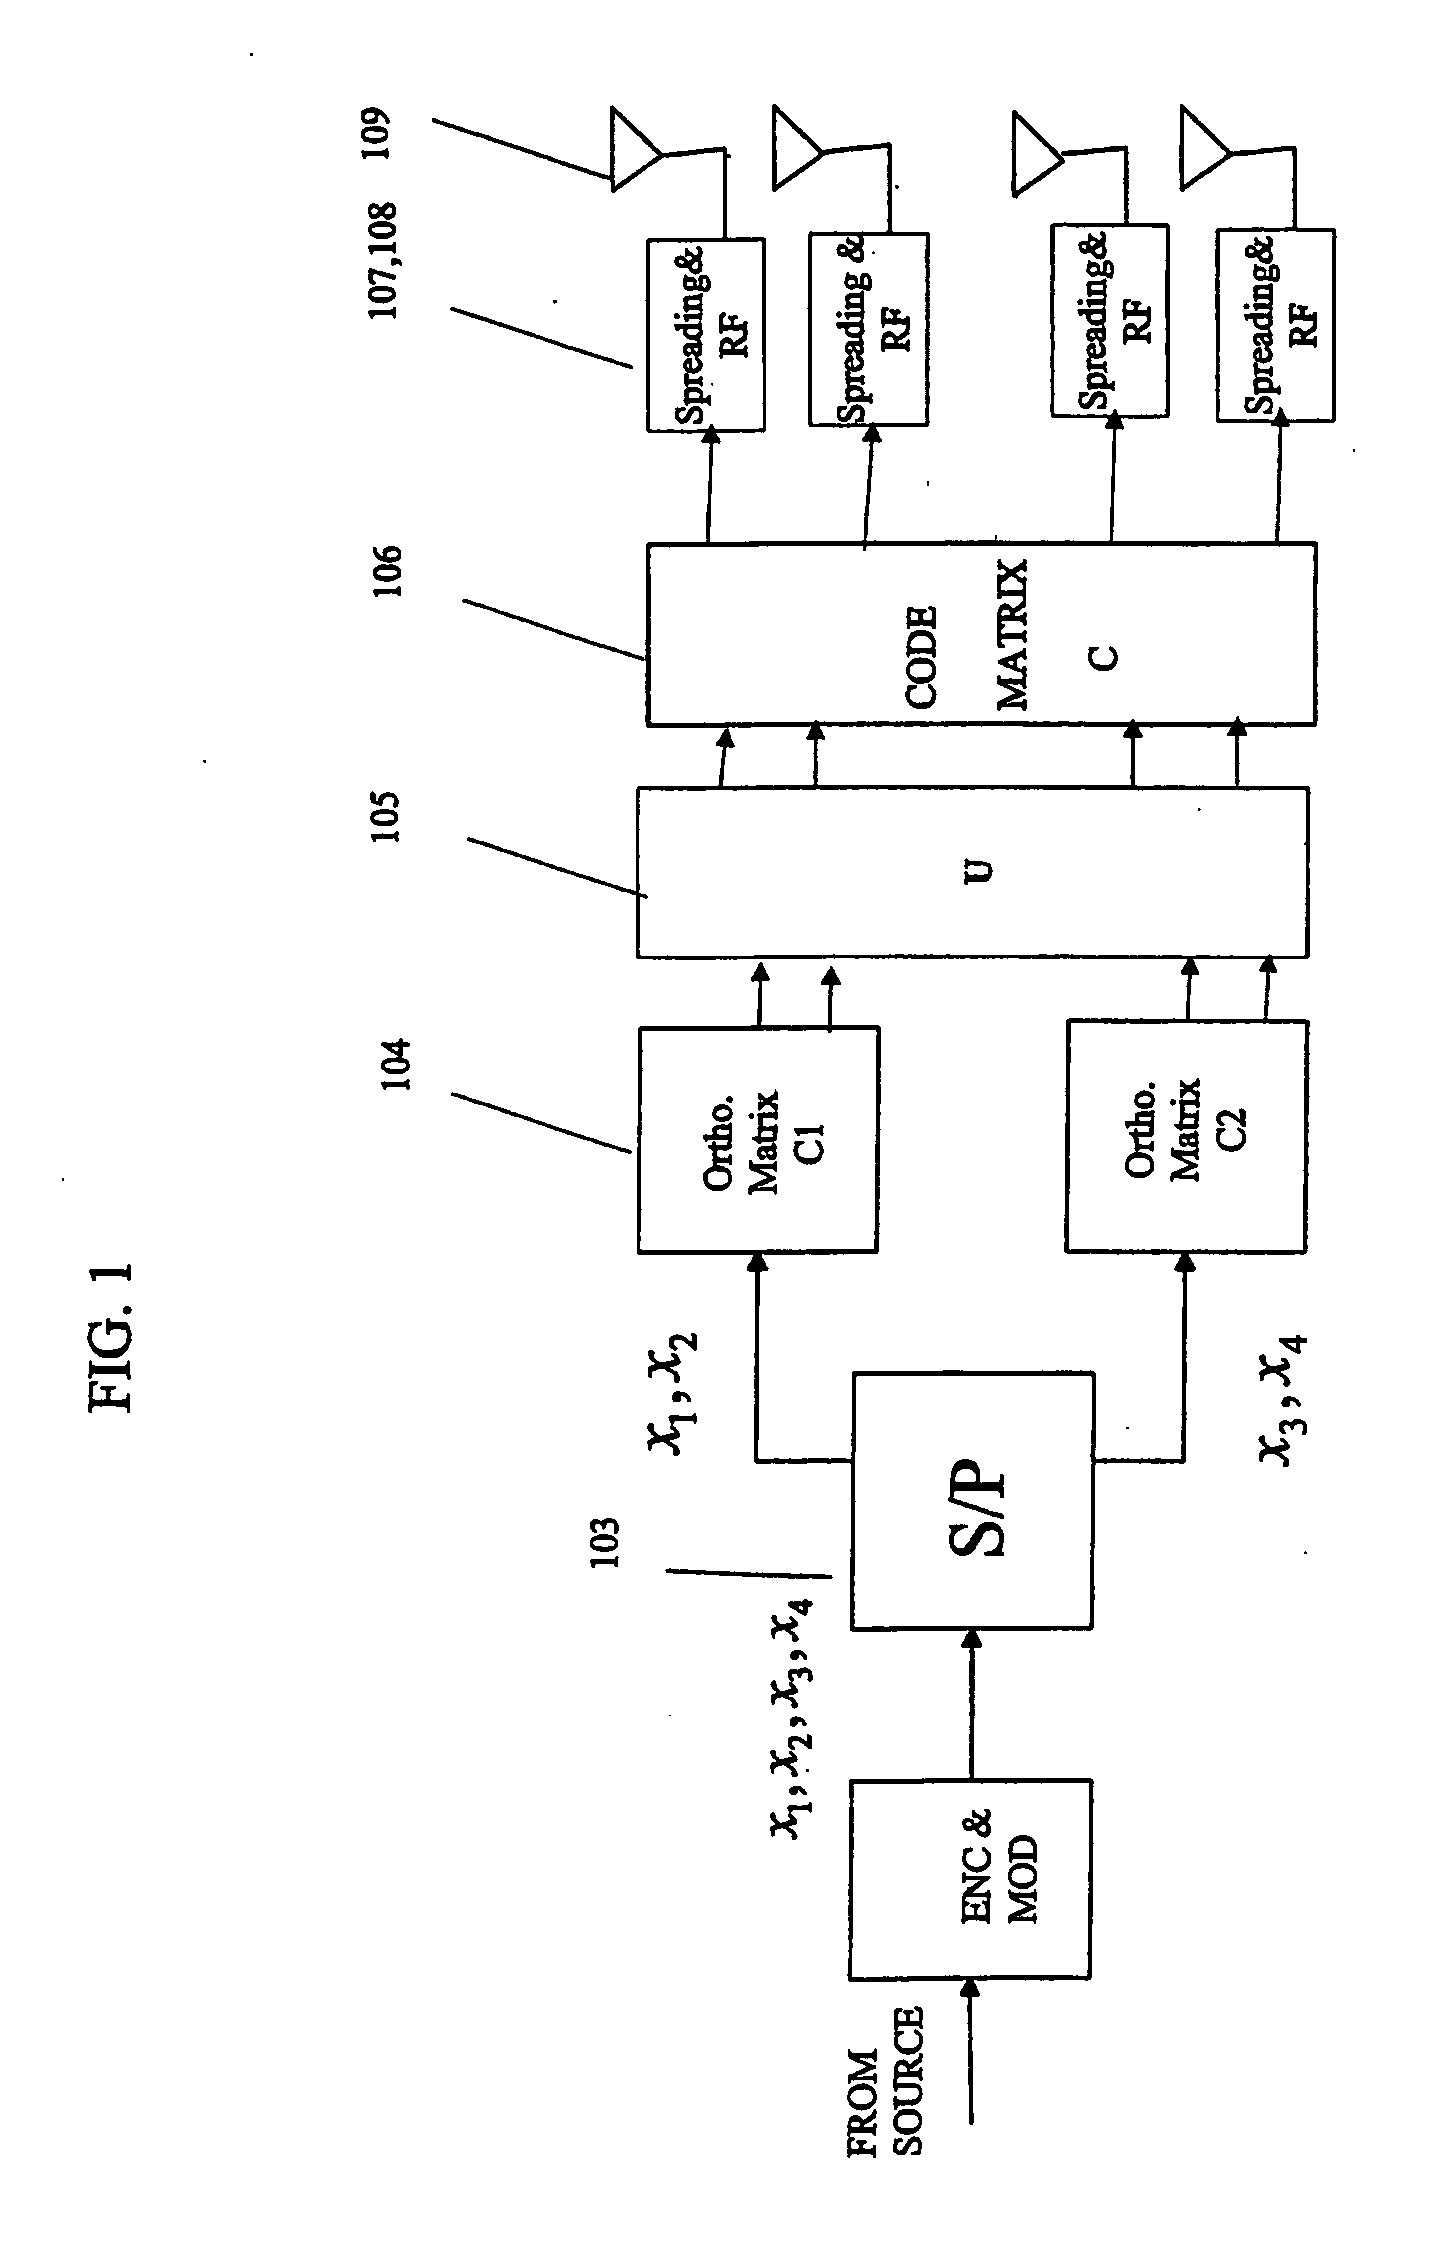 High rate transmission diversity transmission and reception